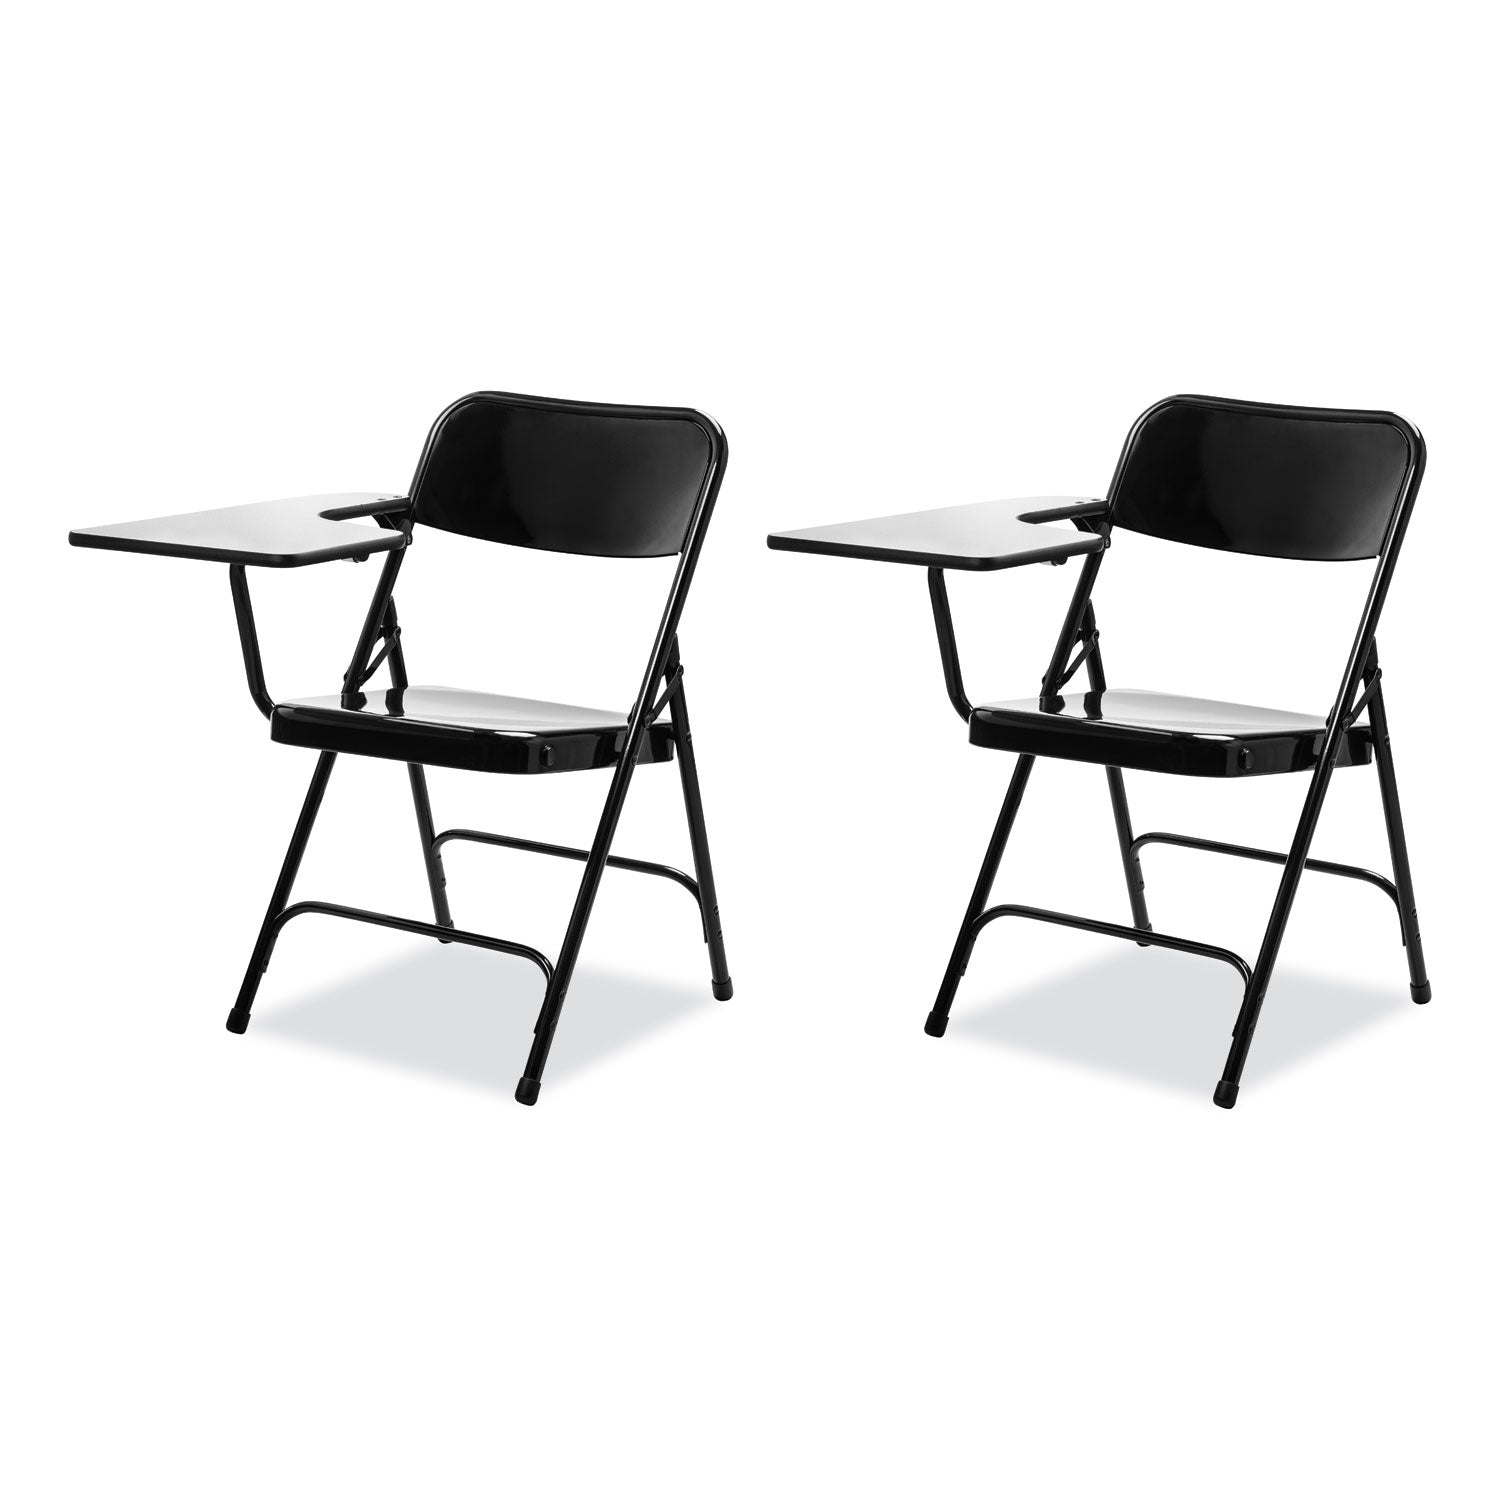 5200-series-right-side-tablet-arm-folding-chair-supports-up-to-480-lb-1725-seat-height-black-2-ctships-in-1-3-bus-days_nps5210r - 1